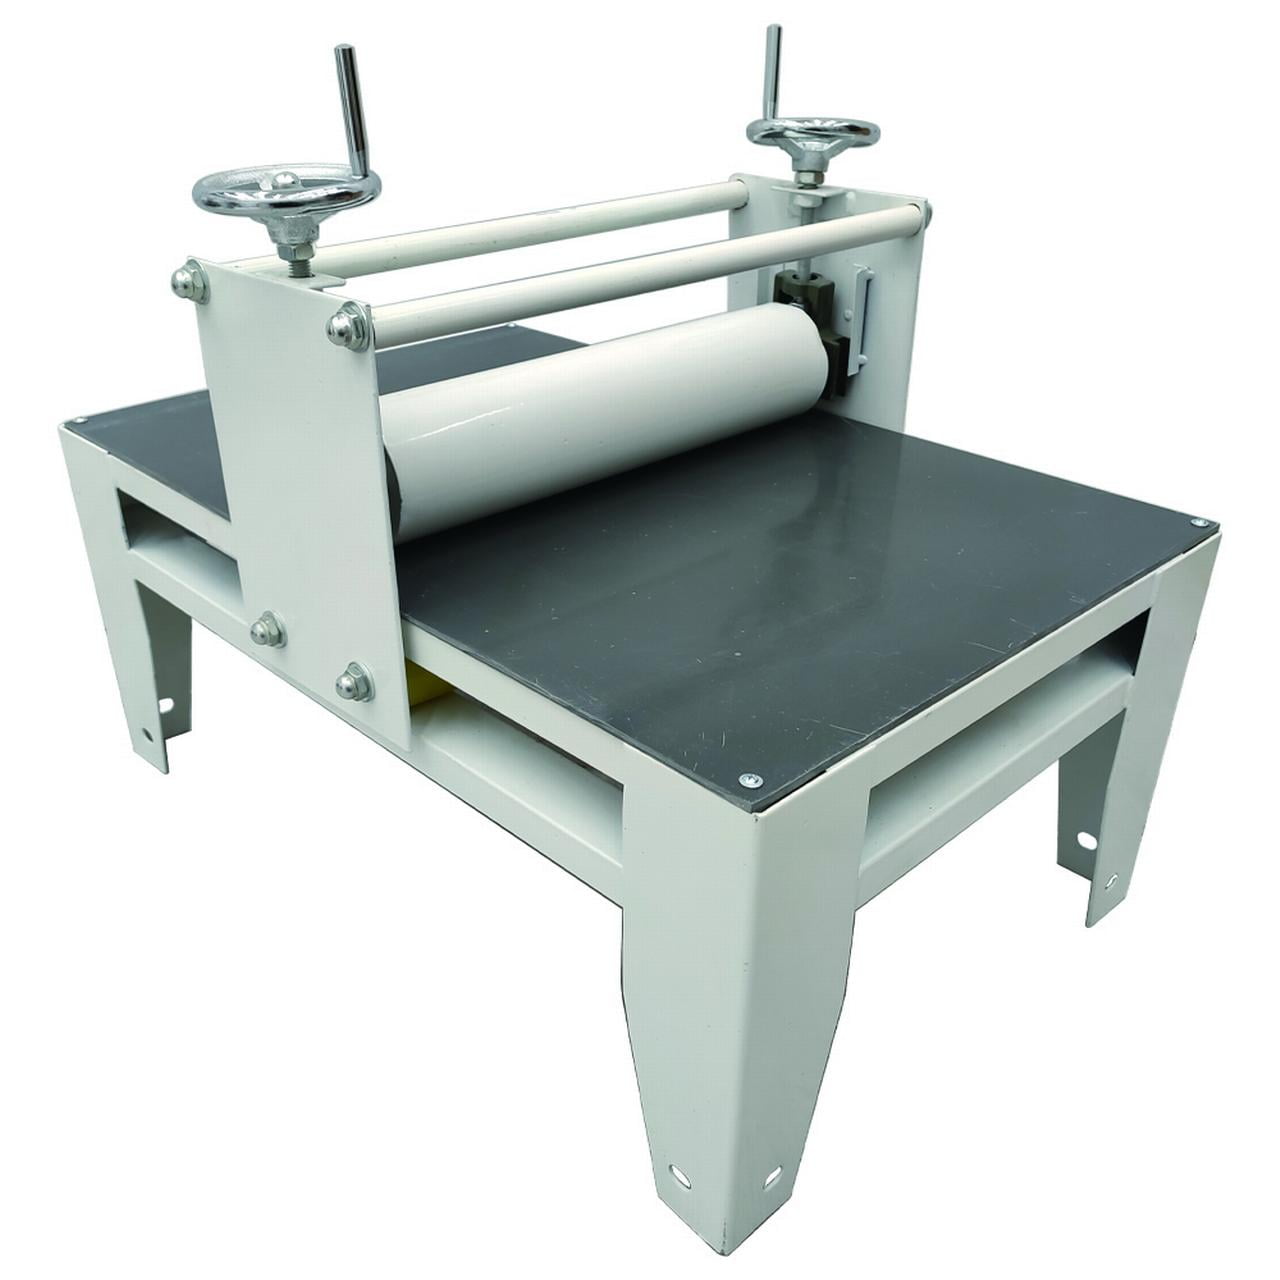  LGXEnzhuo Manual Ceramic Clay Plate Machine Slab Roller for Clay  Heavy Duty Tabletop Ceramic Work Clay Art Craft Adjustable Thickness No  Shims 27.5x17.7Inch Working Table : 藝術、手工藝與縫紉